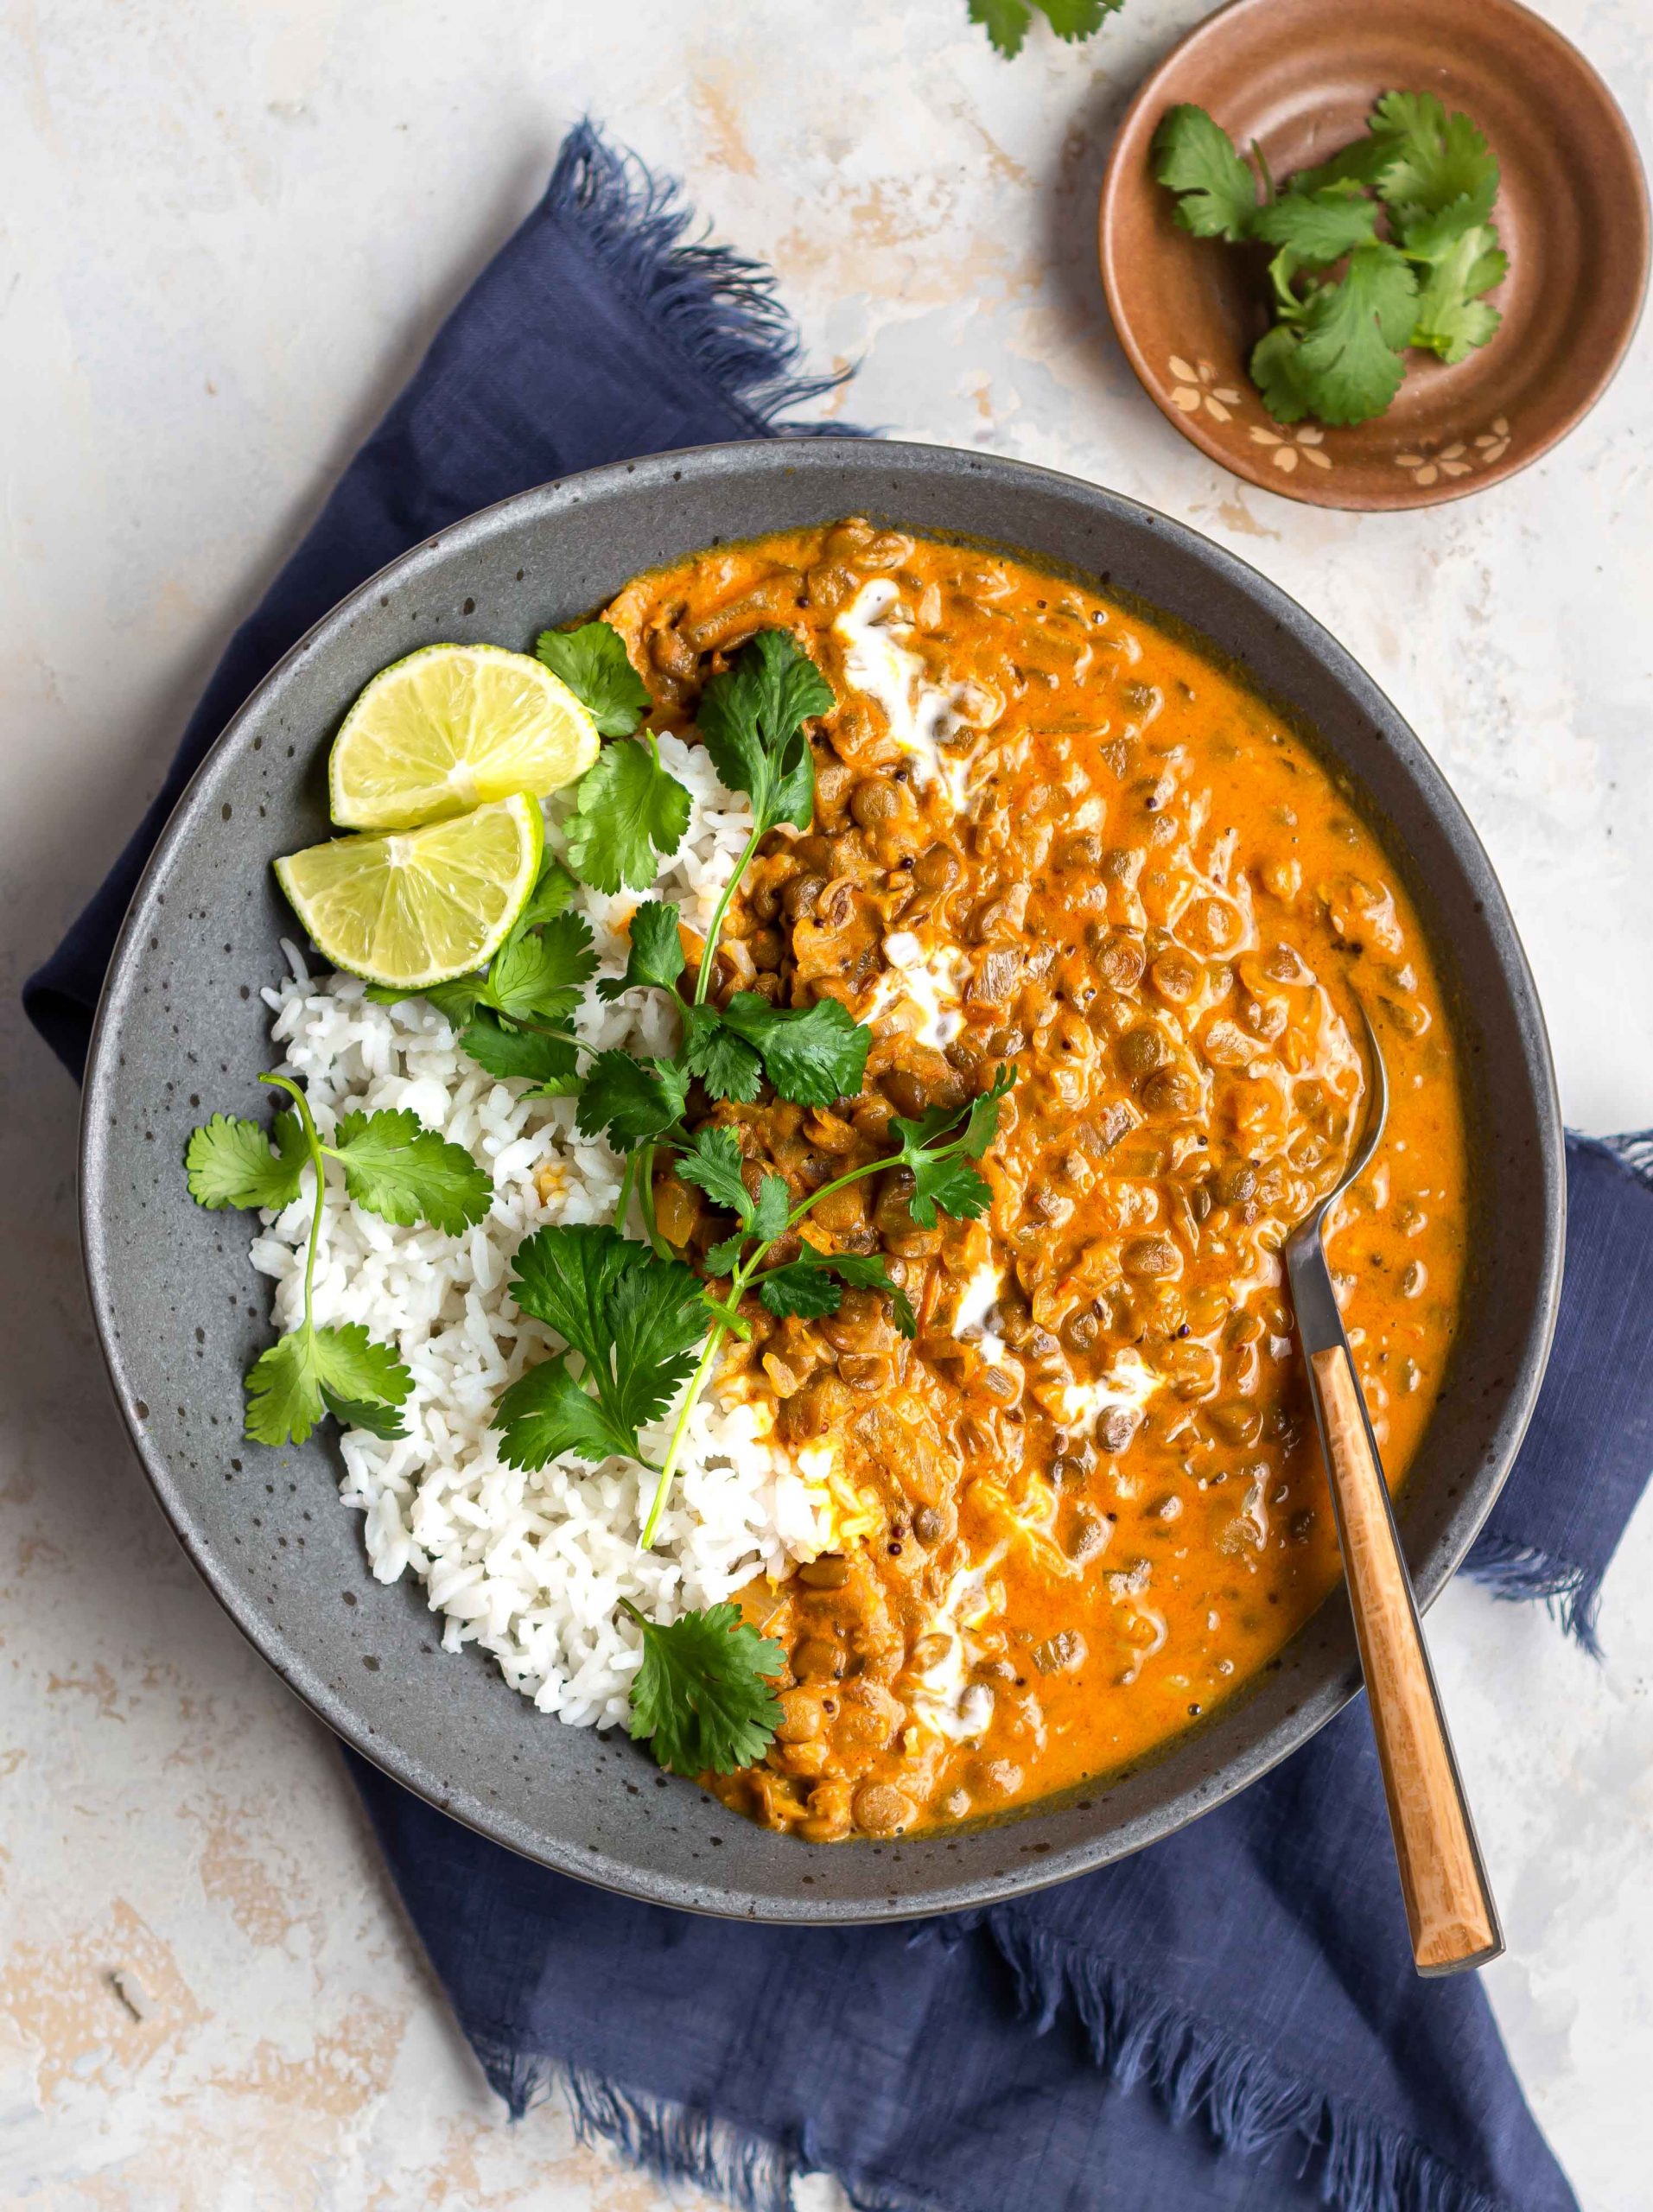 authentic lentils curry made using Indian ingredients.